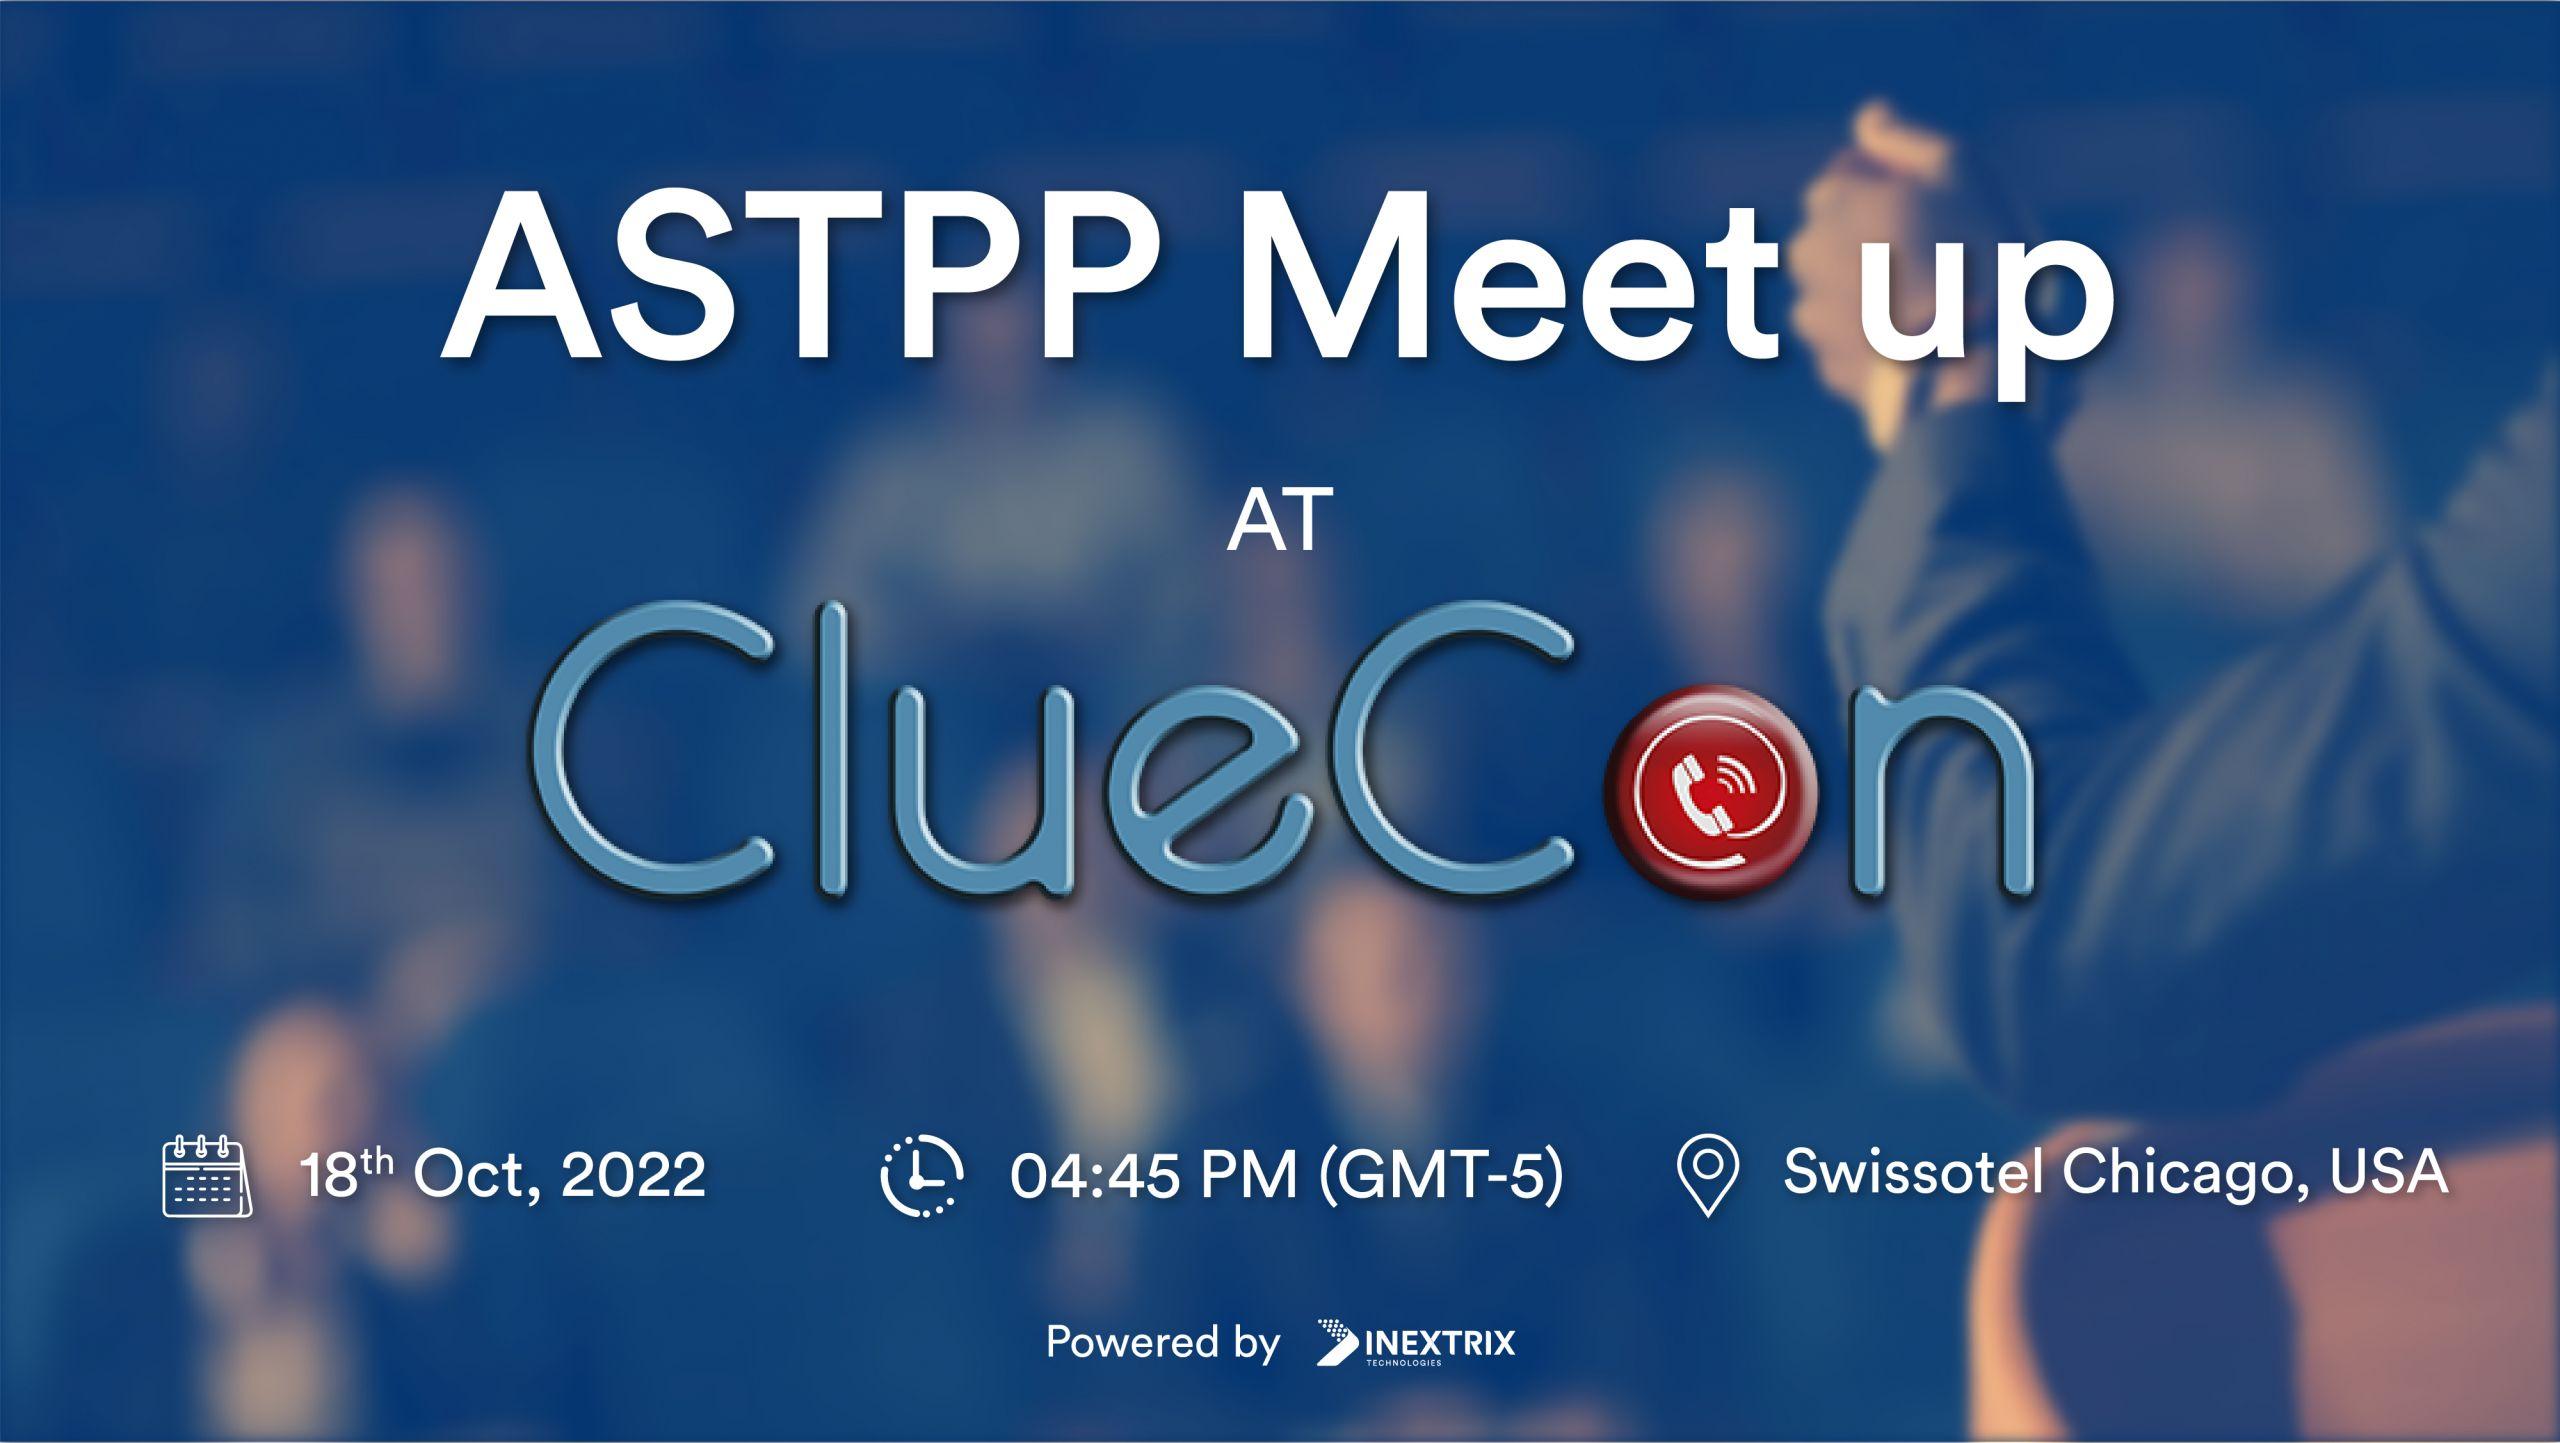 Join The ASTPP Meet UP at Cluecon Conference, Chicago, USA